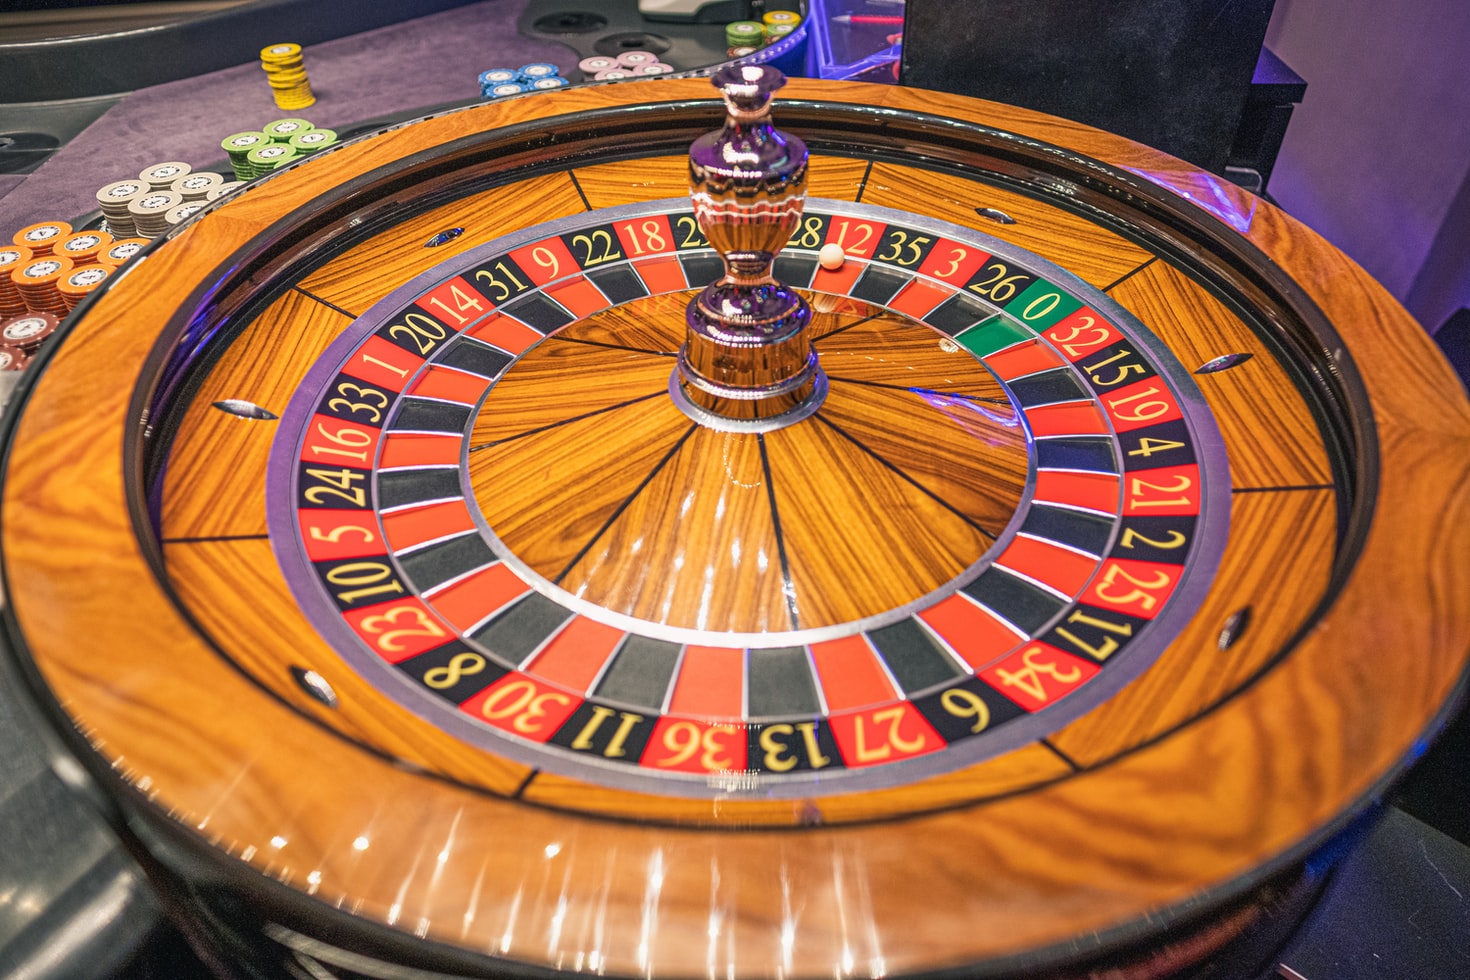 Roulette strategy: how not to lose too much